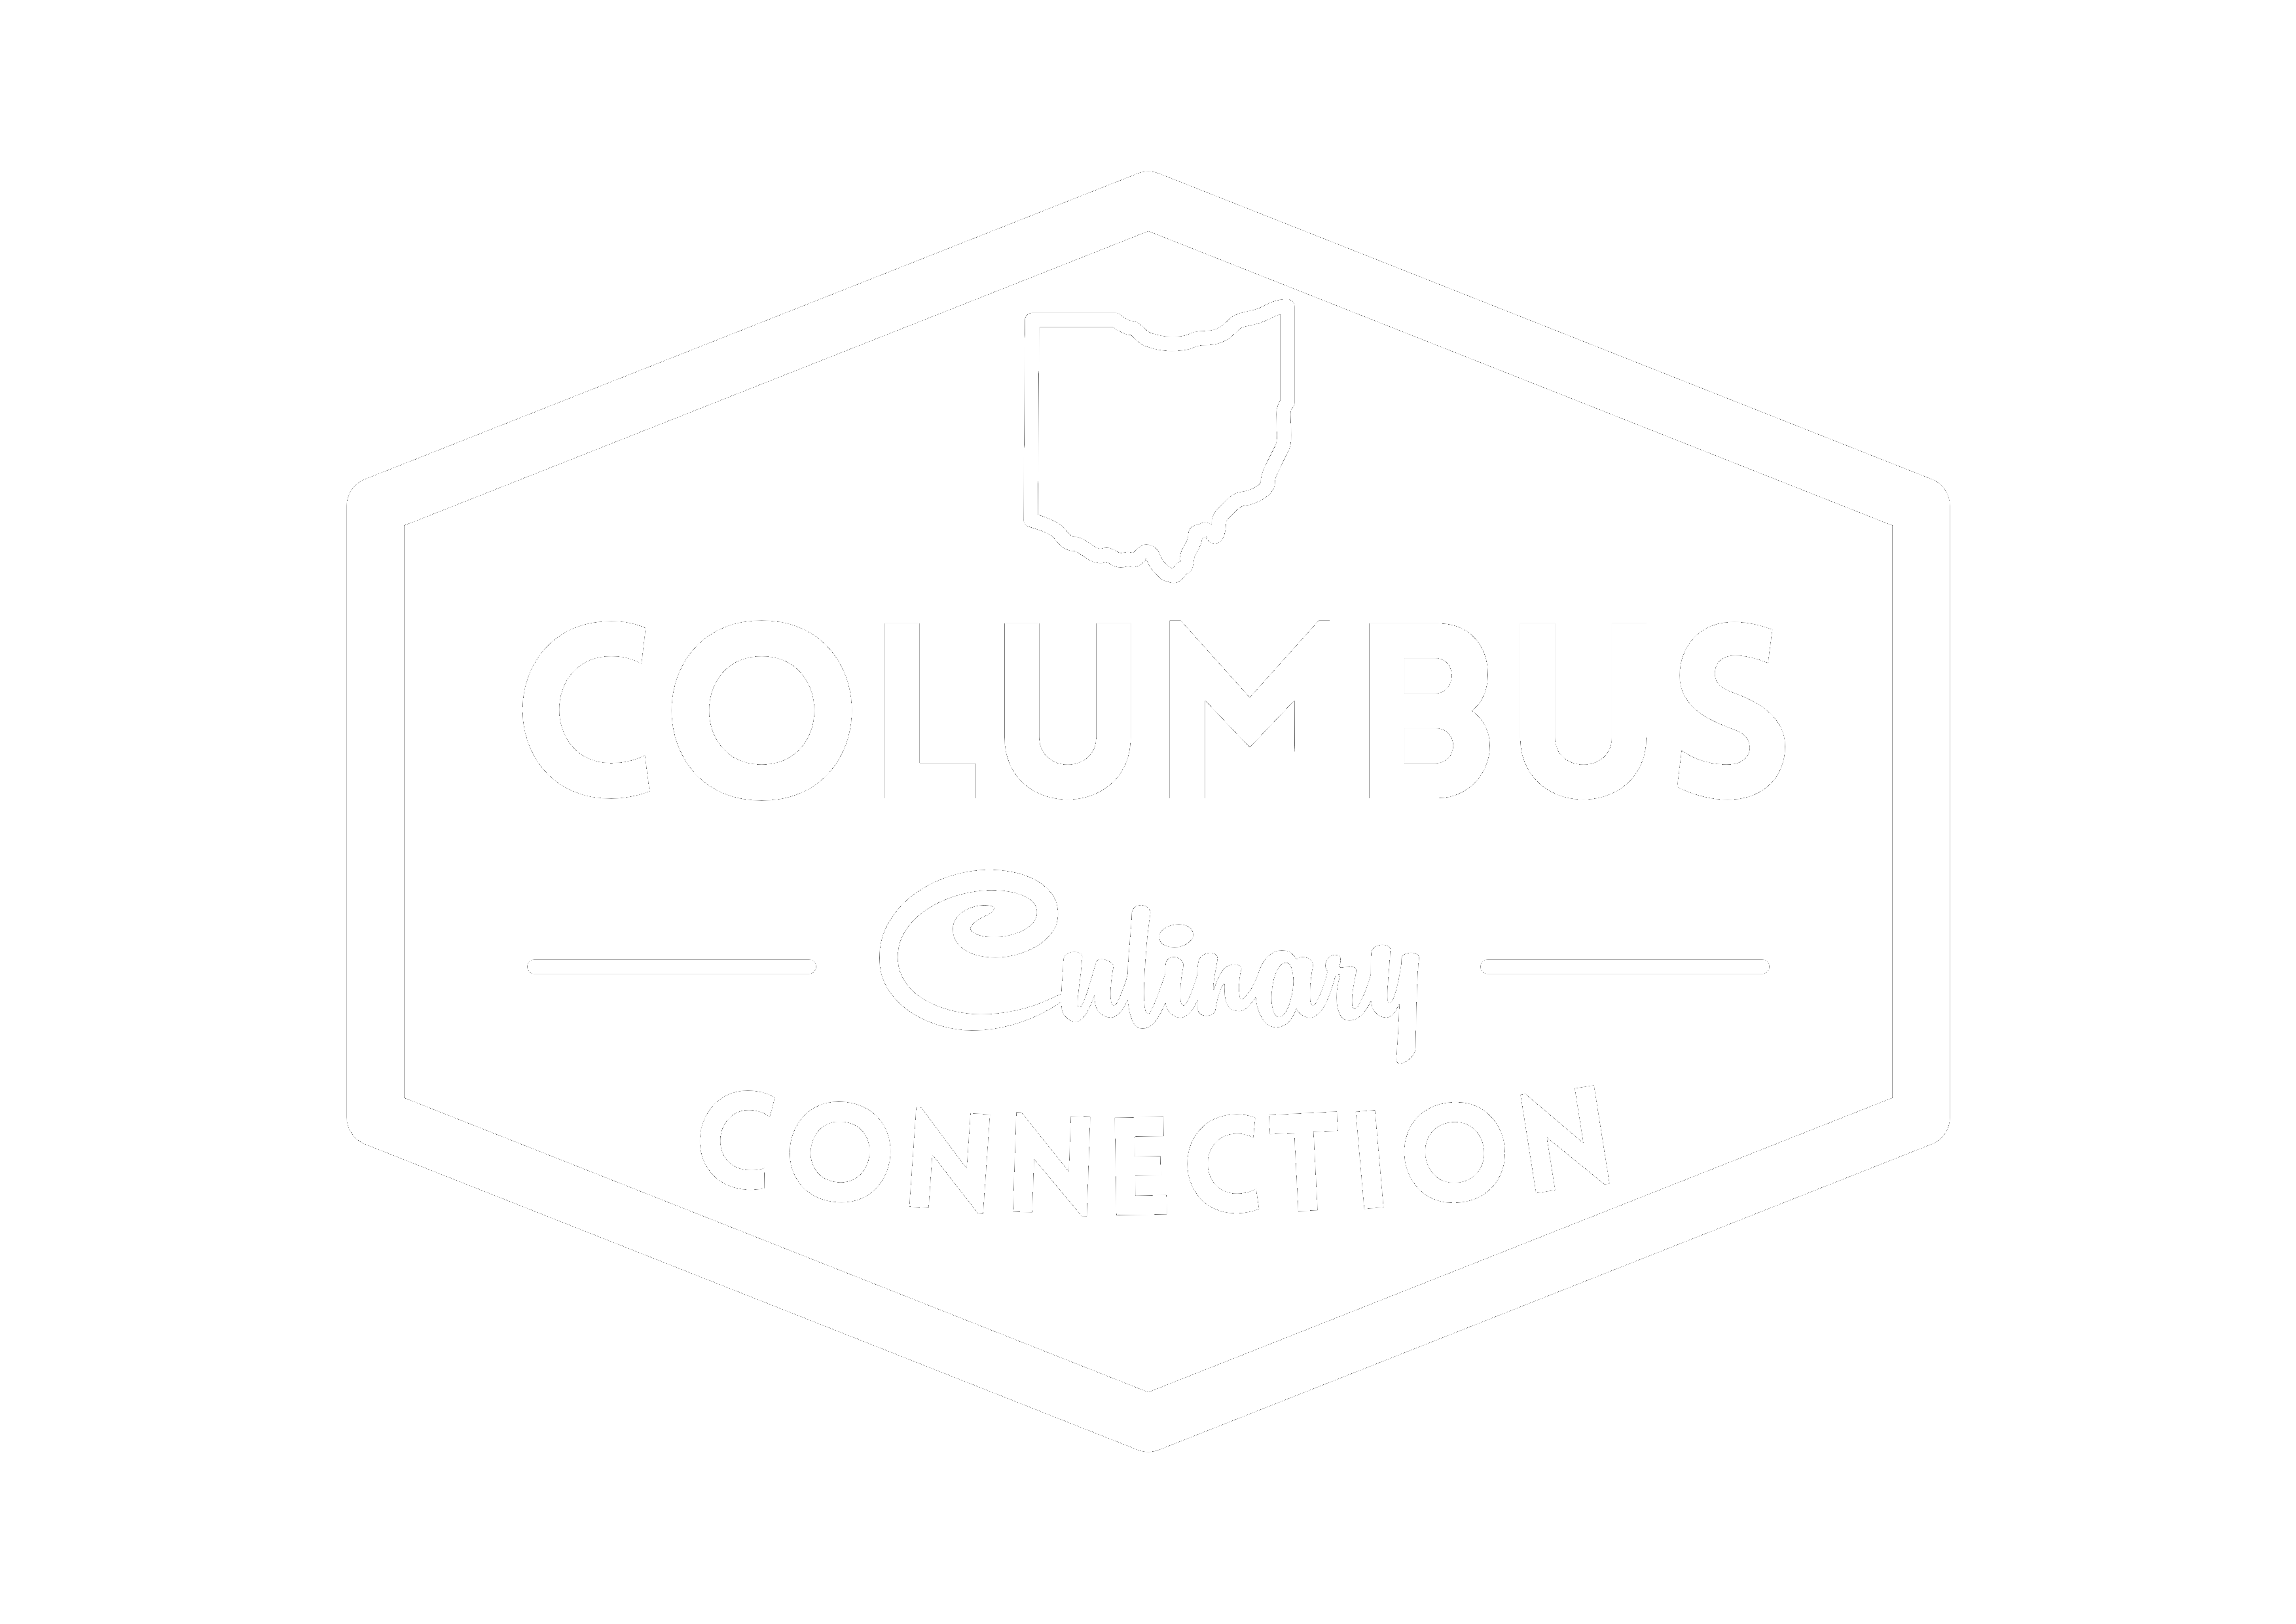 Columbus Culinary Connection